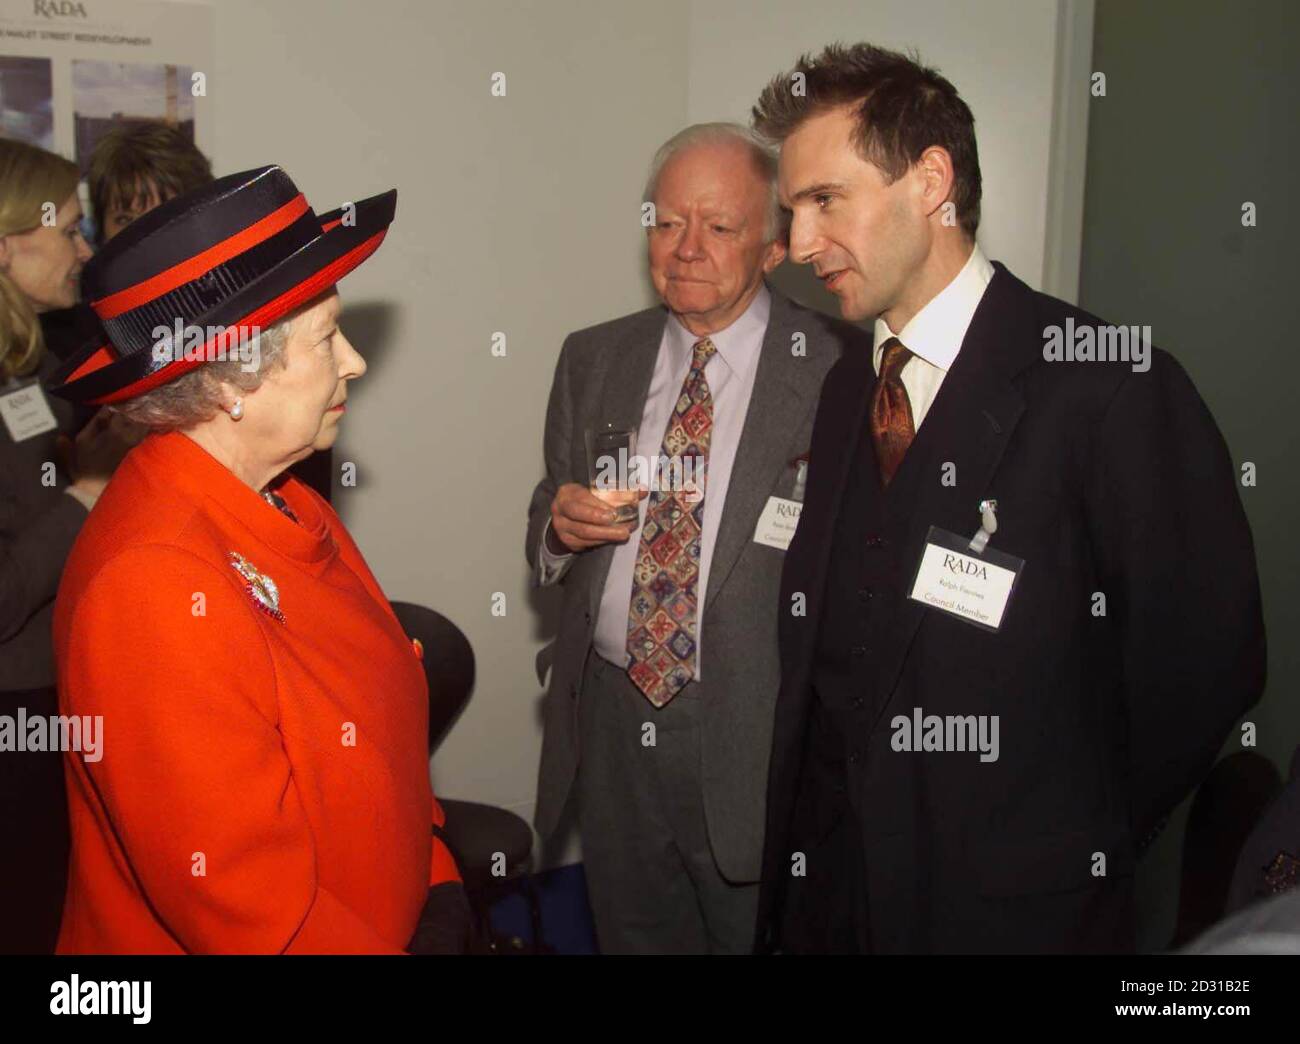 The Queen meets actor Ralph Fiennes at the opening of the new premises of the Royal Academy of Dramatic Art in London. During the visit, the Queen, accompanied by Lord Attenborough, met students and celebrities linked to the academy. Stock Photo